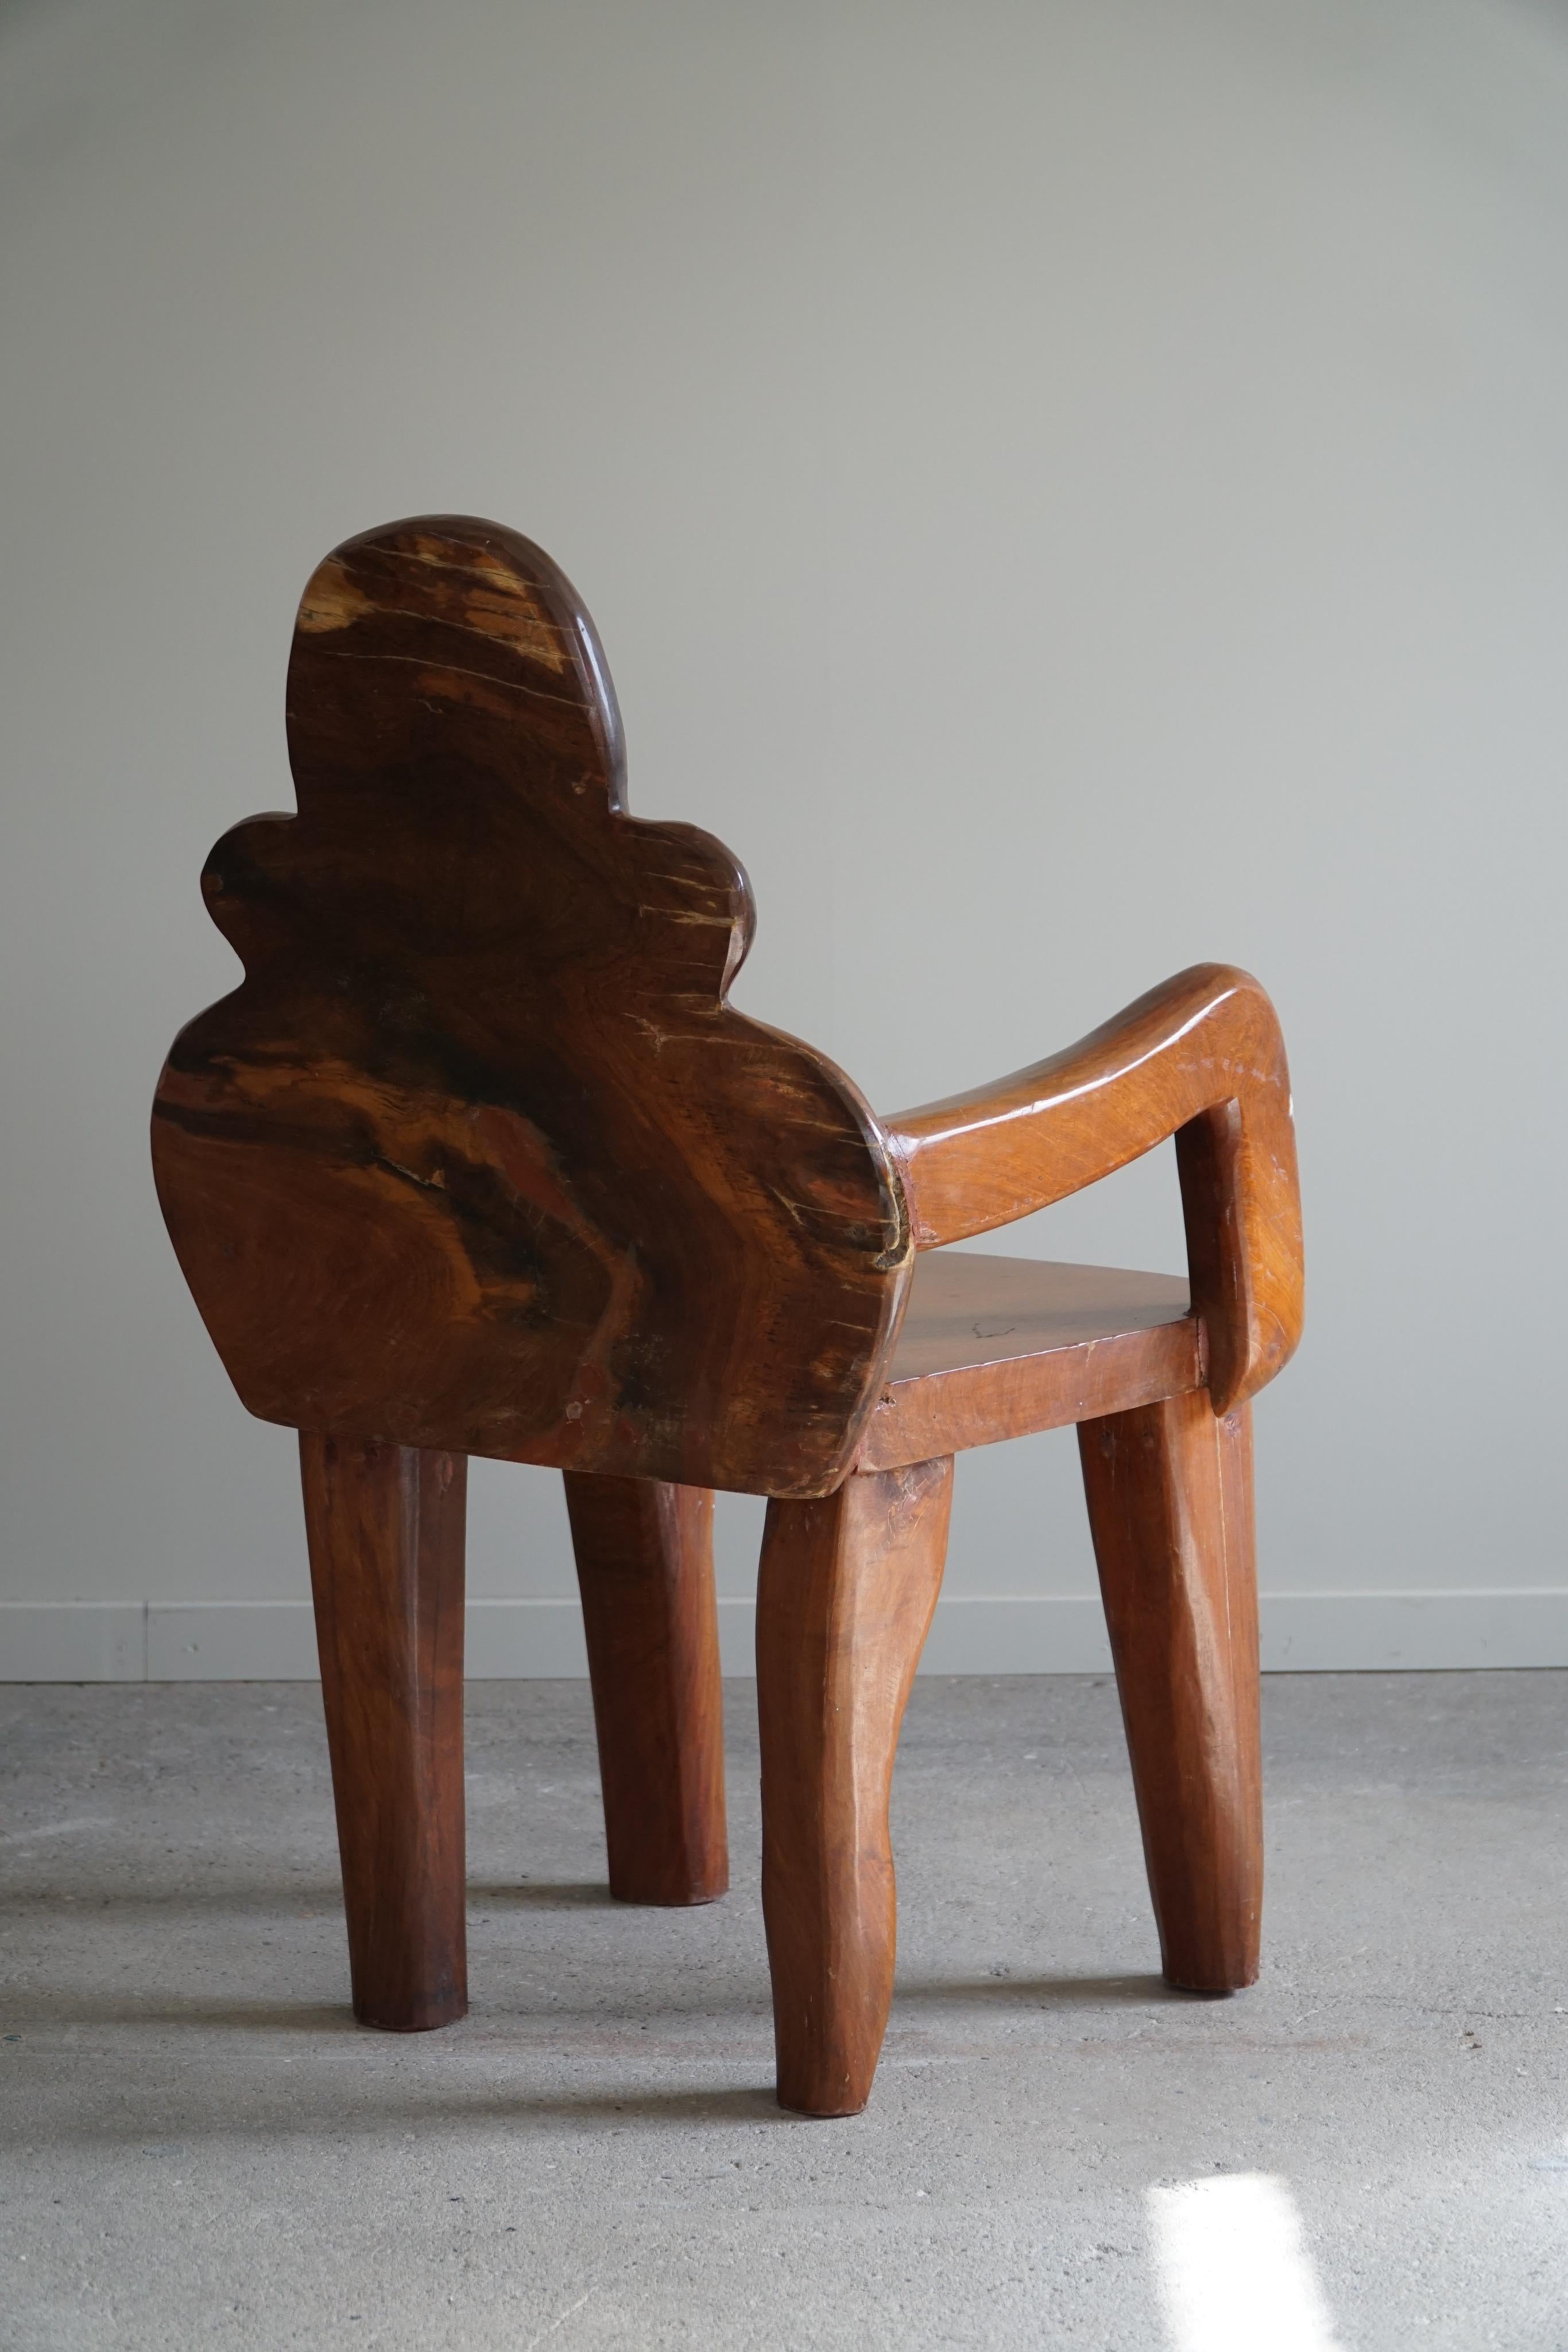 Hand-Carved Organic Handcrafted Wabi Sabi Armchair in Solid Wood, Swedish Modern, 1900s For Sale